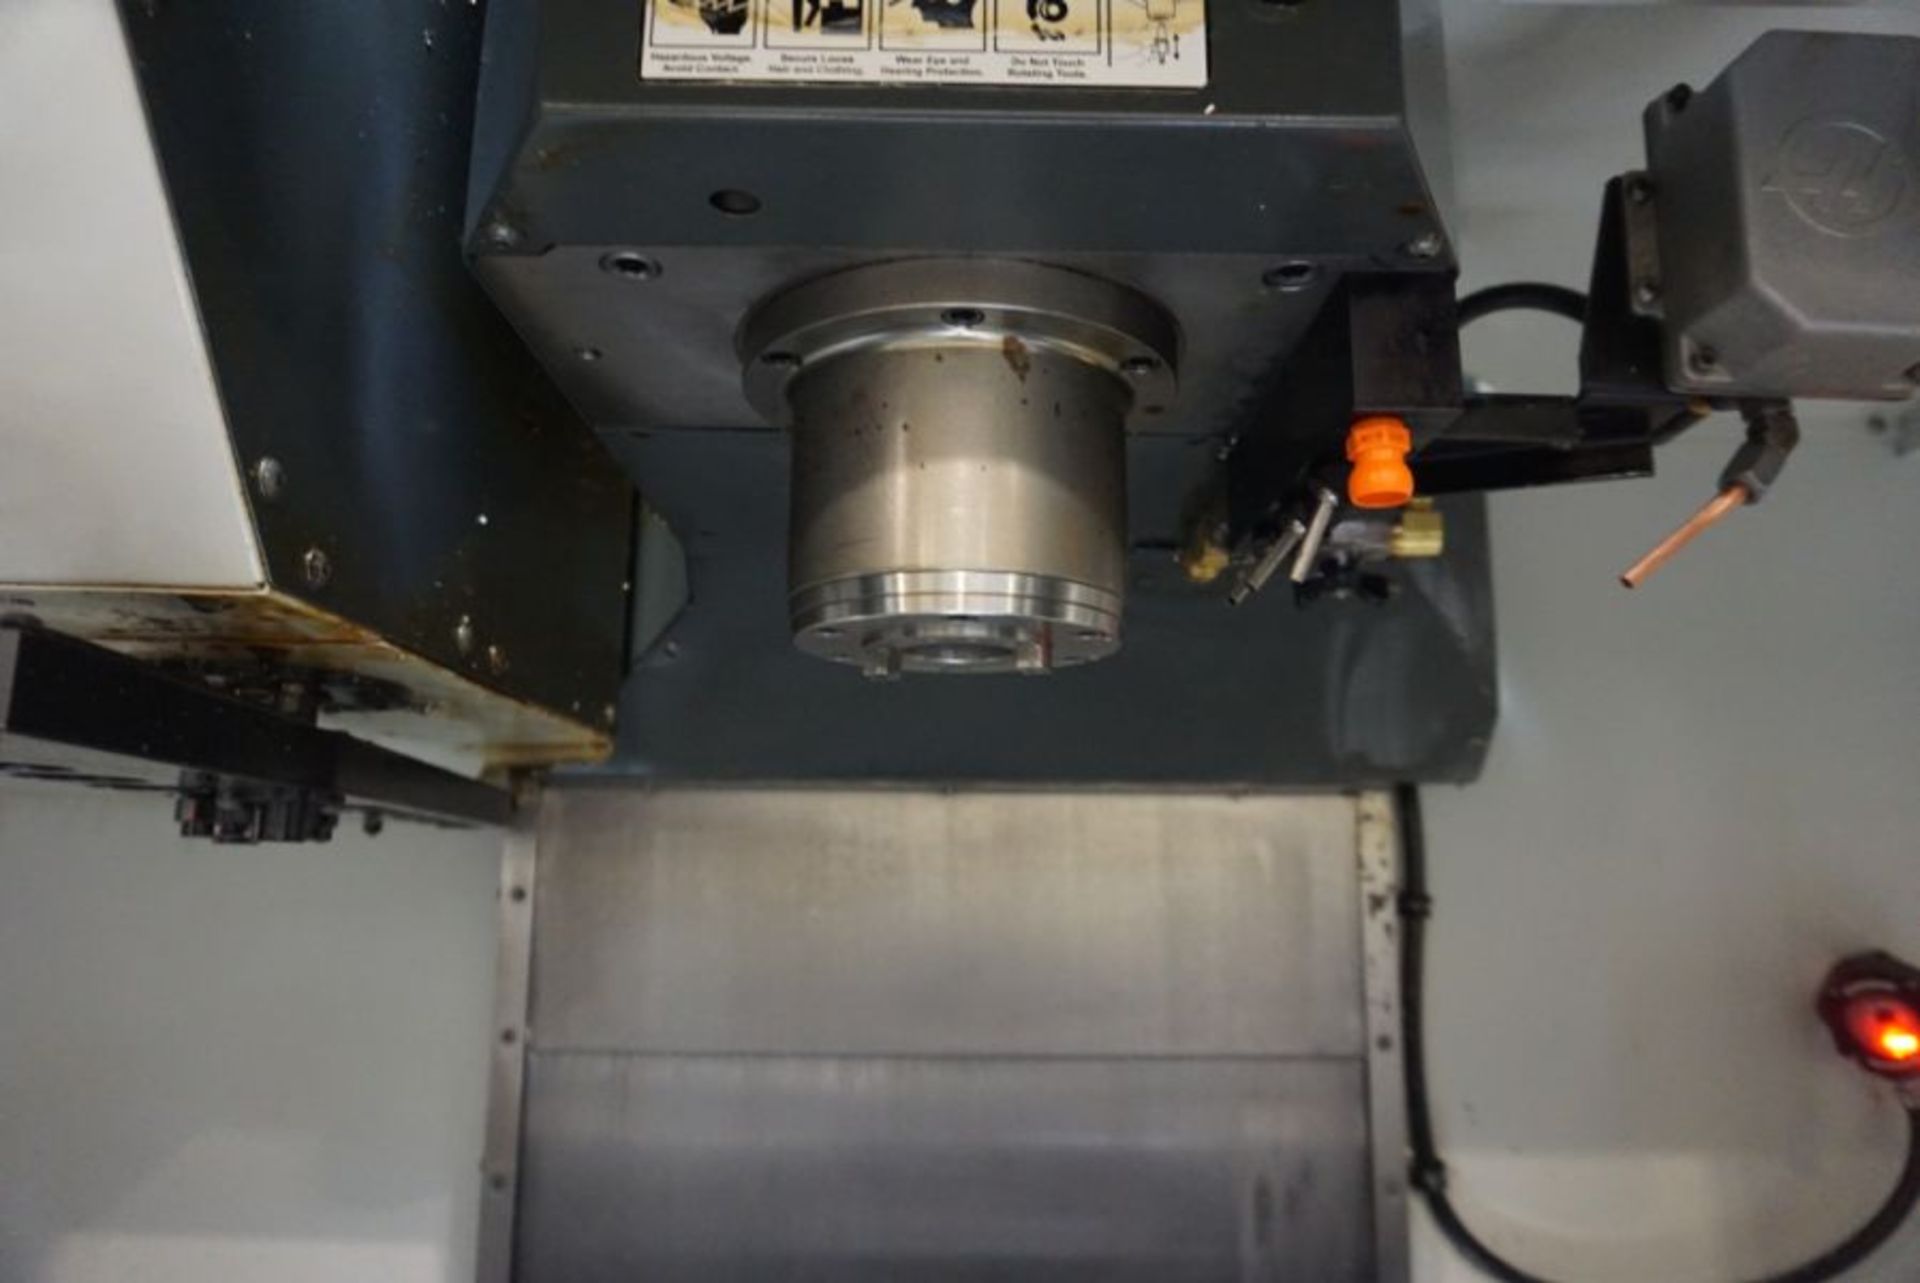 Haas VF-3 Vertical Machining Center, New 2011 - Image 4 of 7